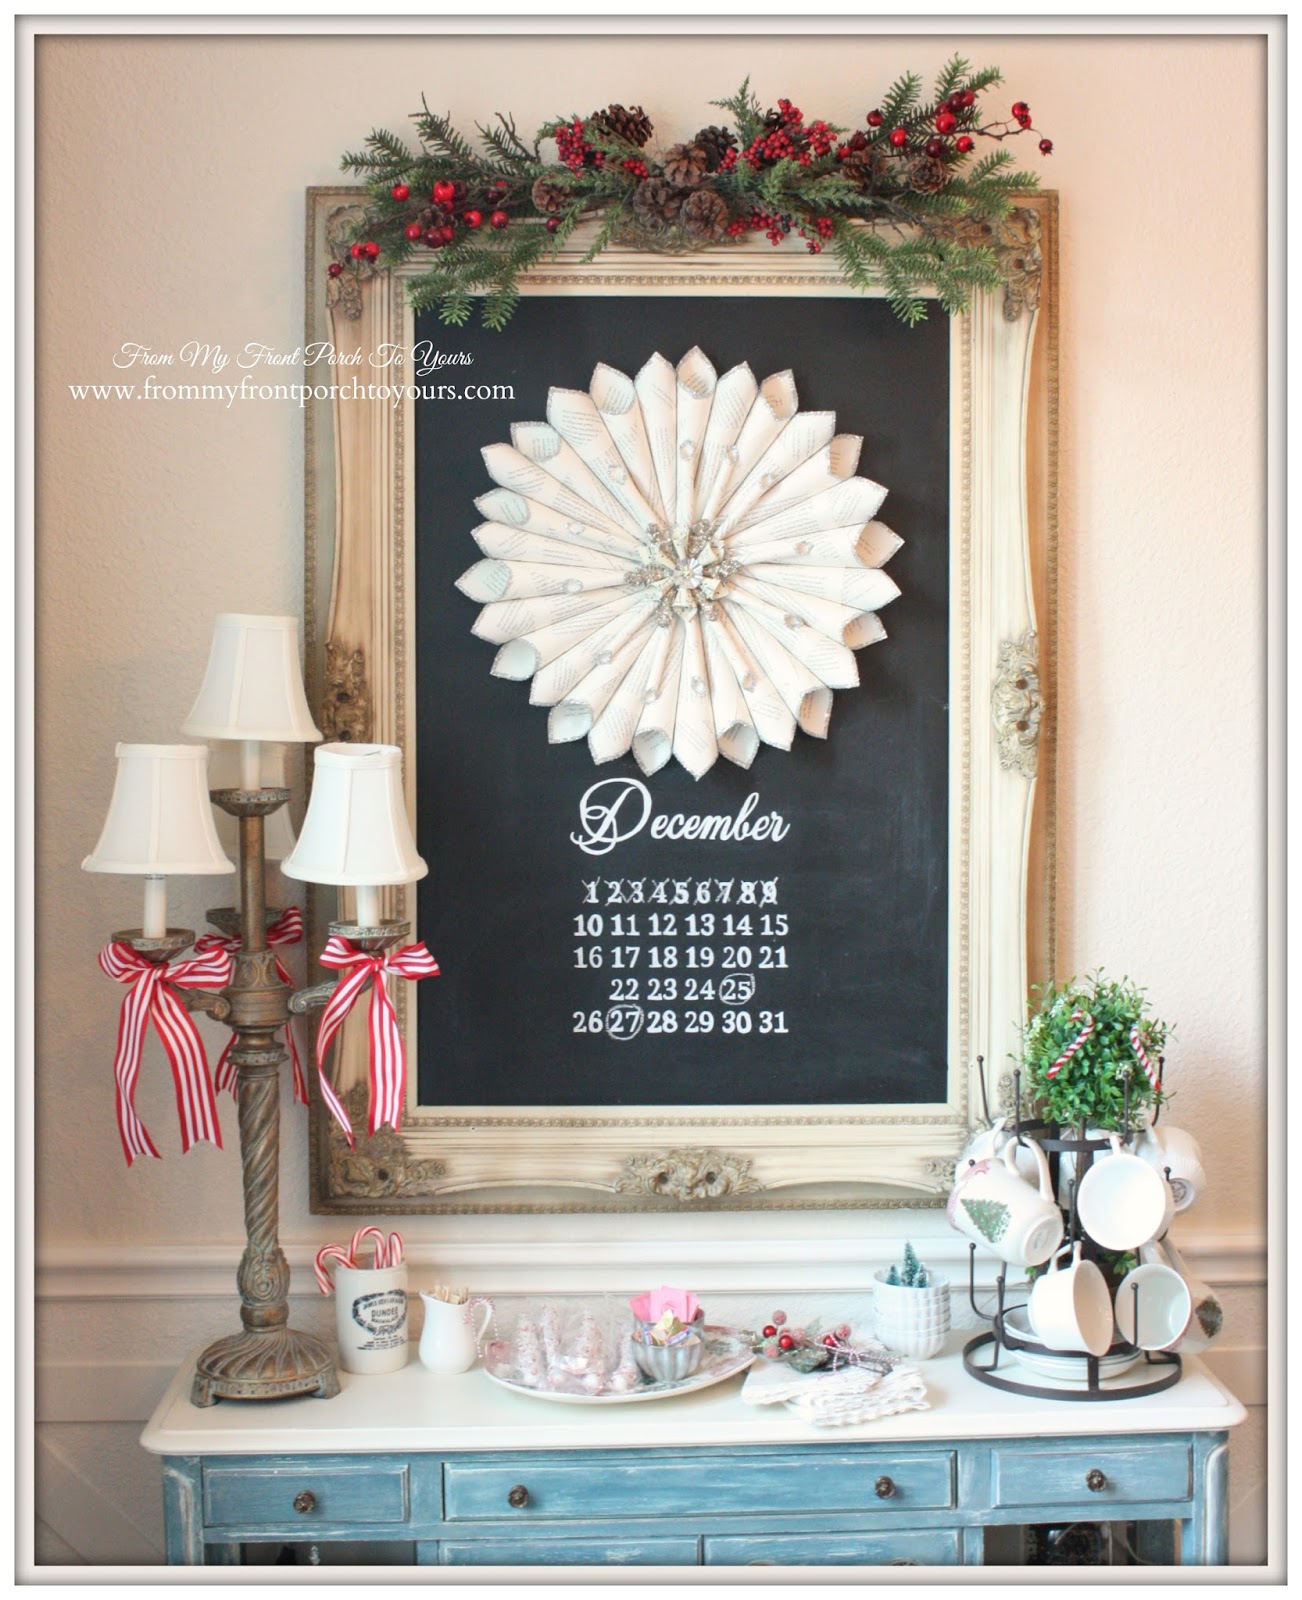 Dining Room Chalkboard-French Farmhouse Vintage Christmas Dining Room- From My Front Porch To Yours